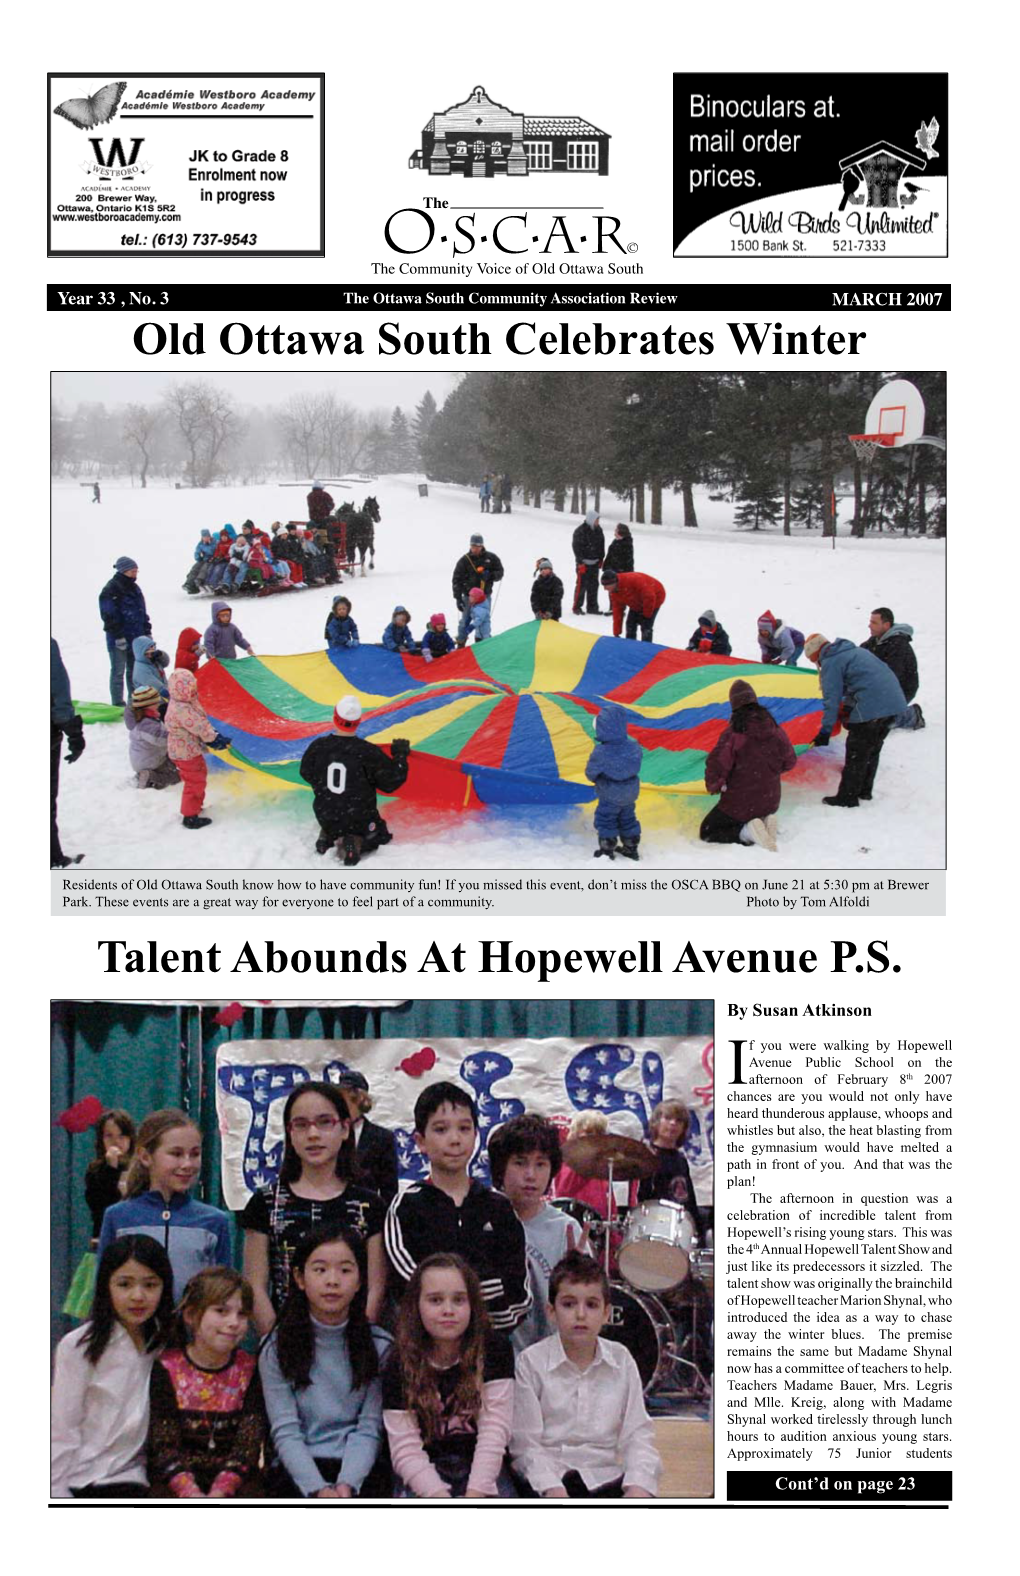 Old Ottawa South Celebrates Winter Talent Abounds at Hopewell